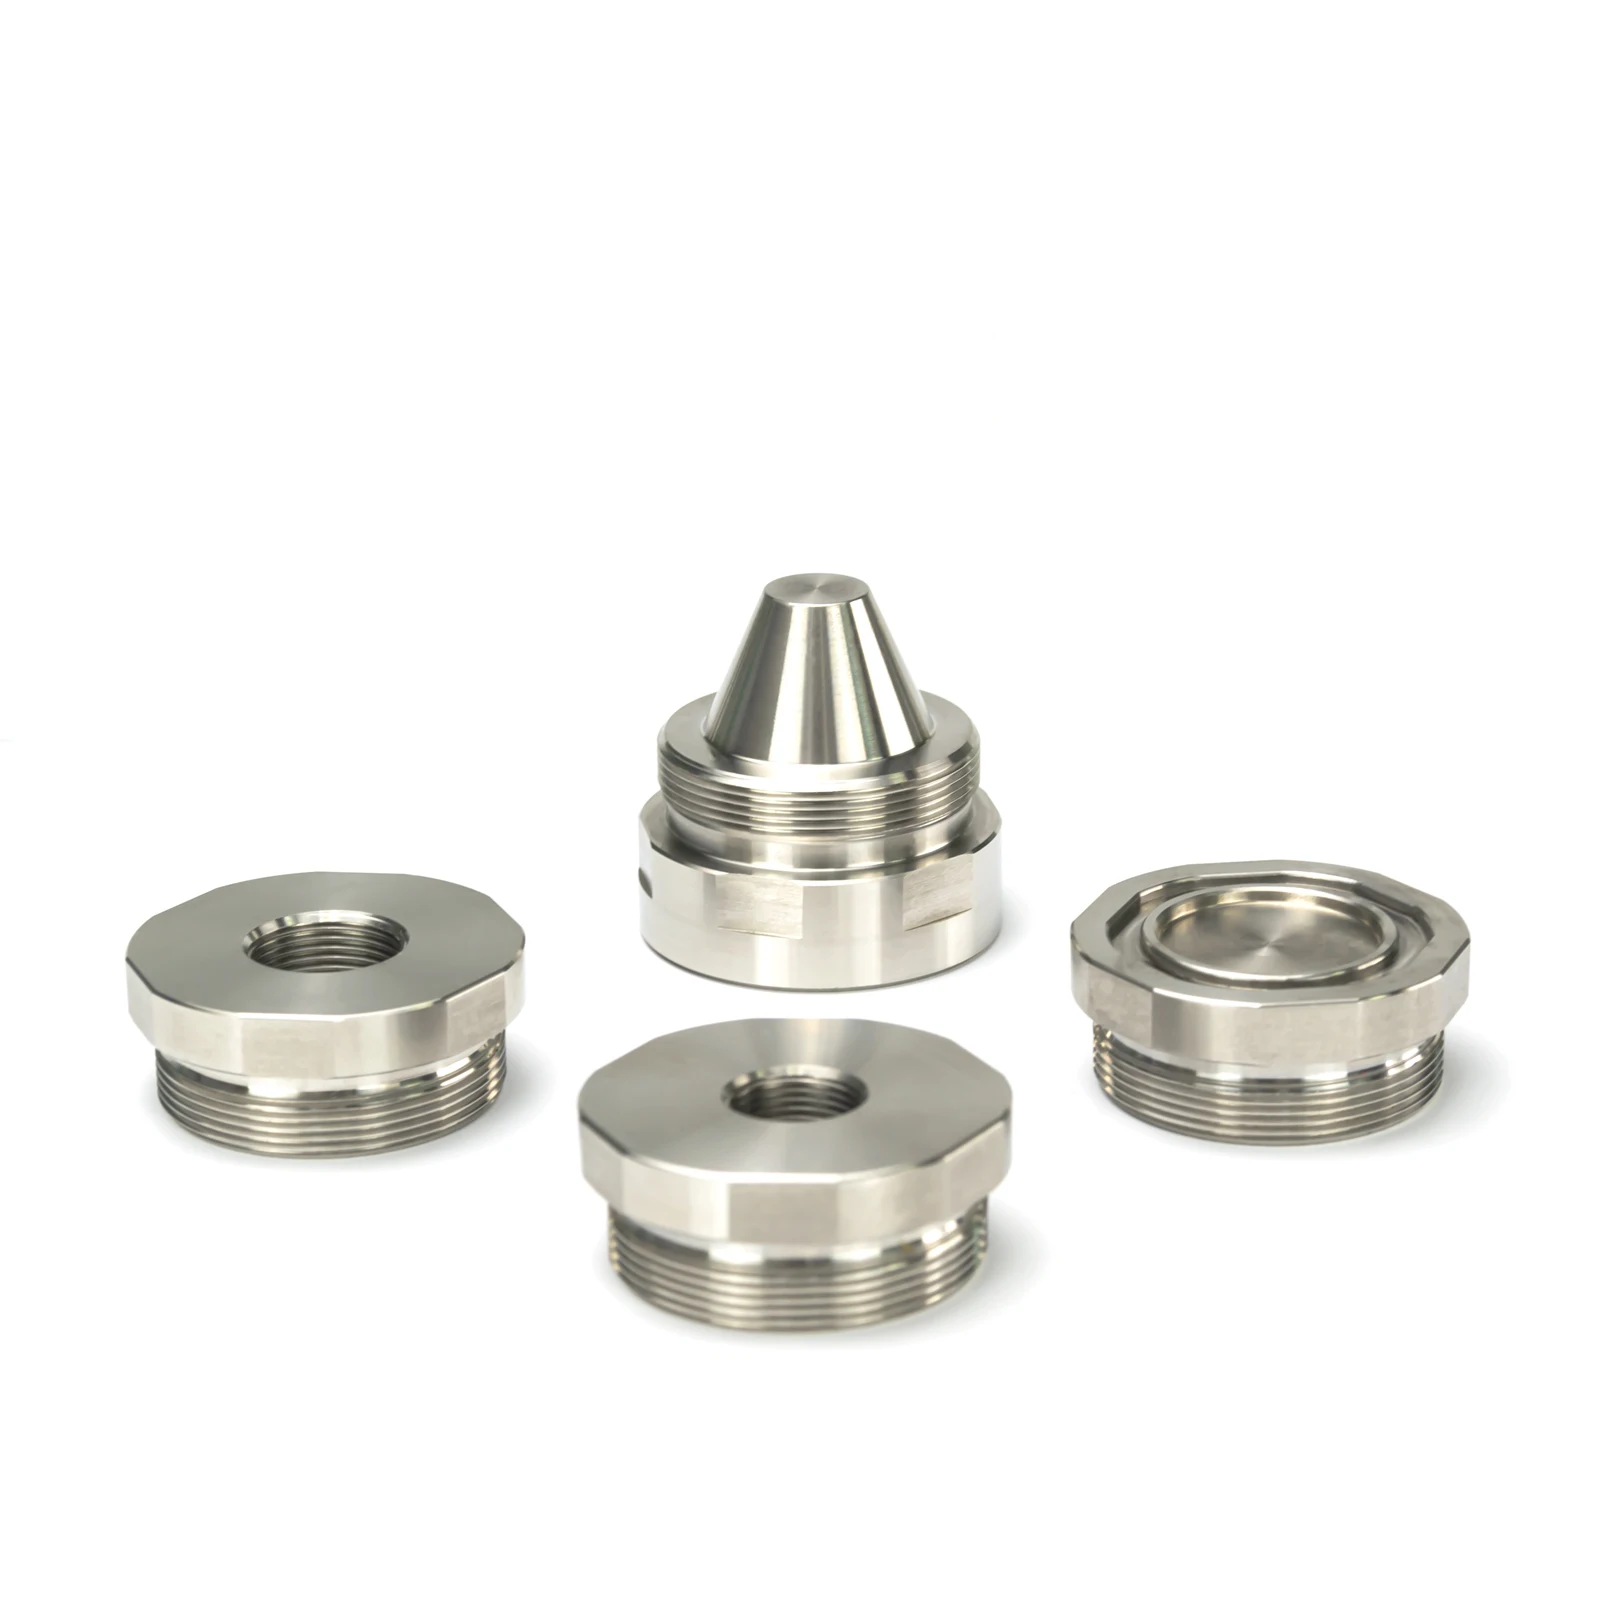 

7"L 1.5''OD 17-4 Stainless Steel Dodecagonal Modular Cleaning Tube Filter 1.375x24 MST 8x Cups with 1/2x28 + 5/8x24 End Caps